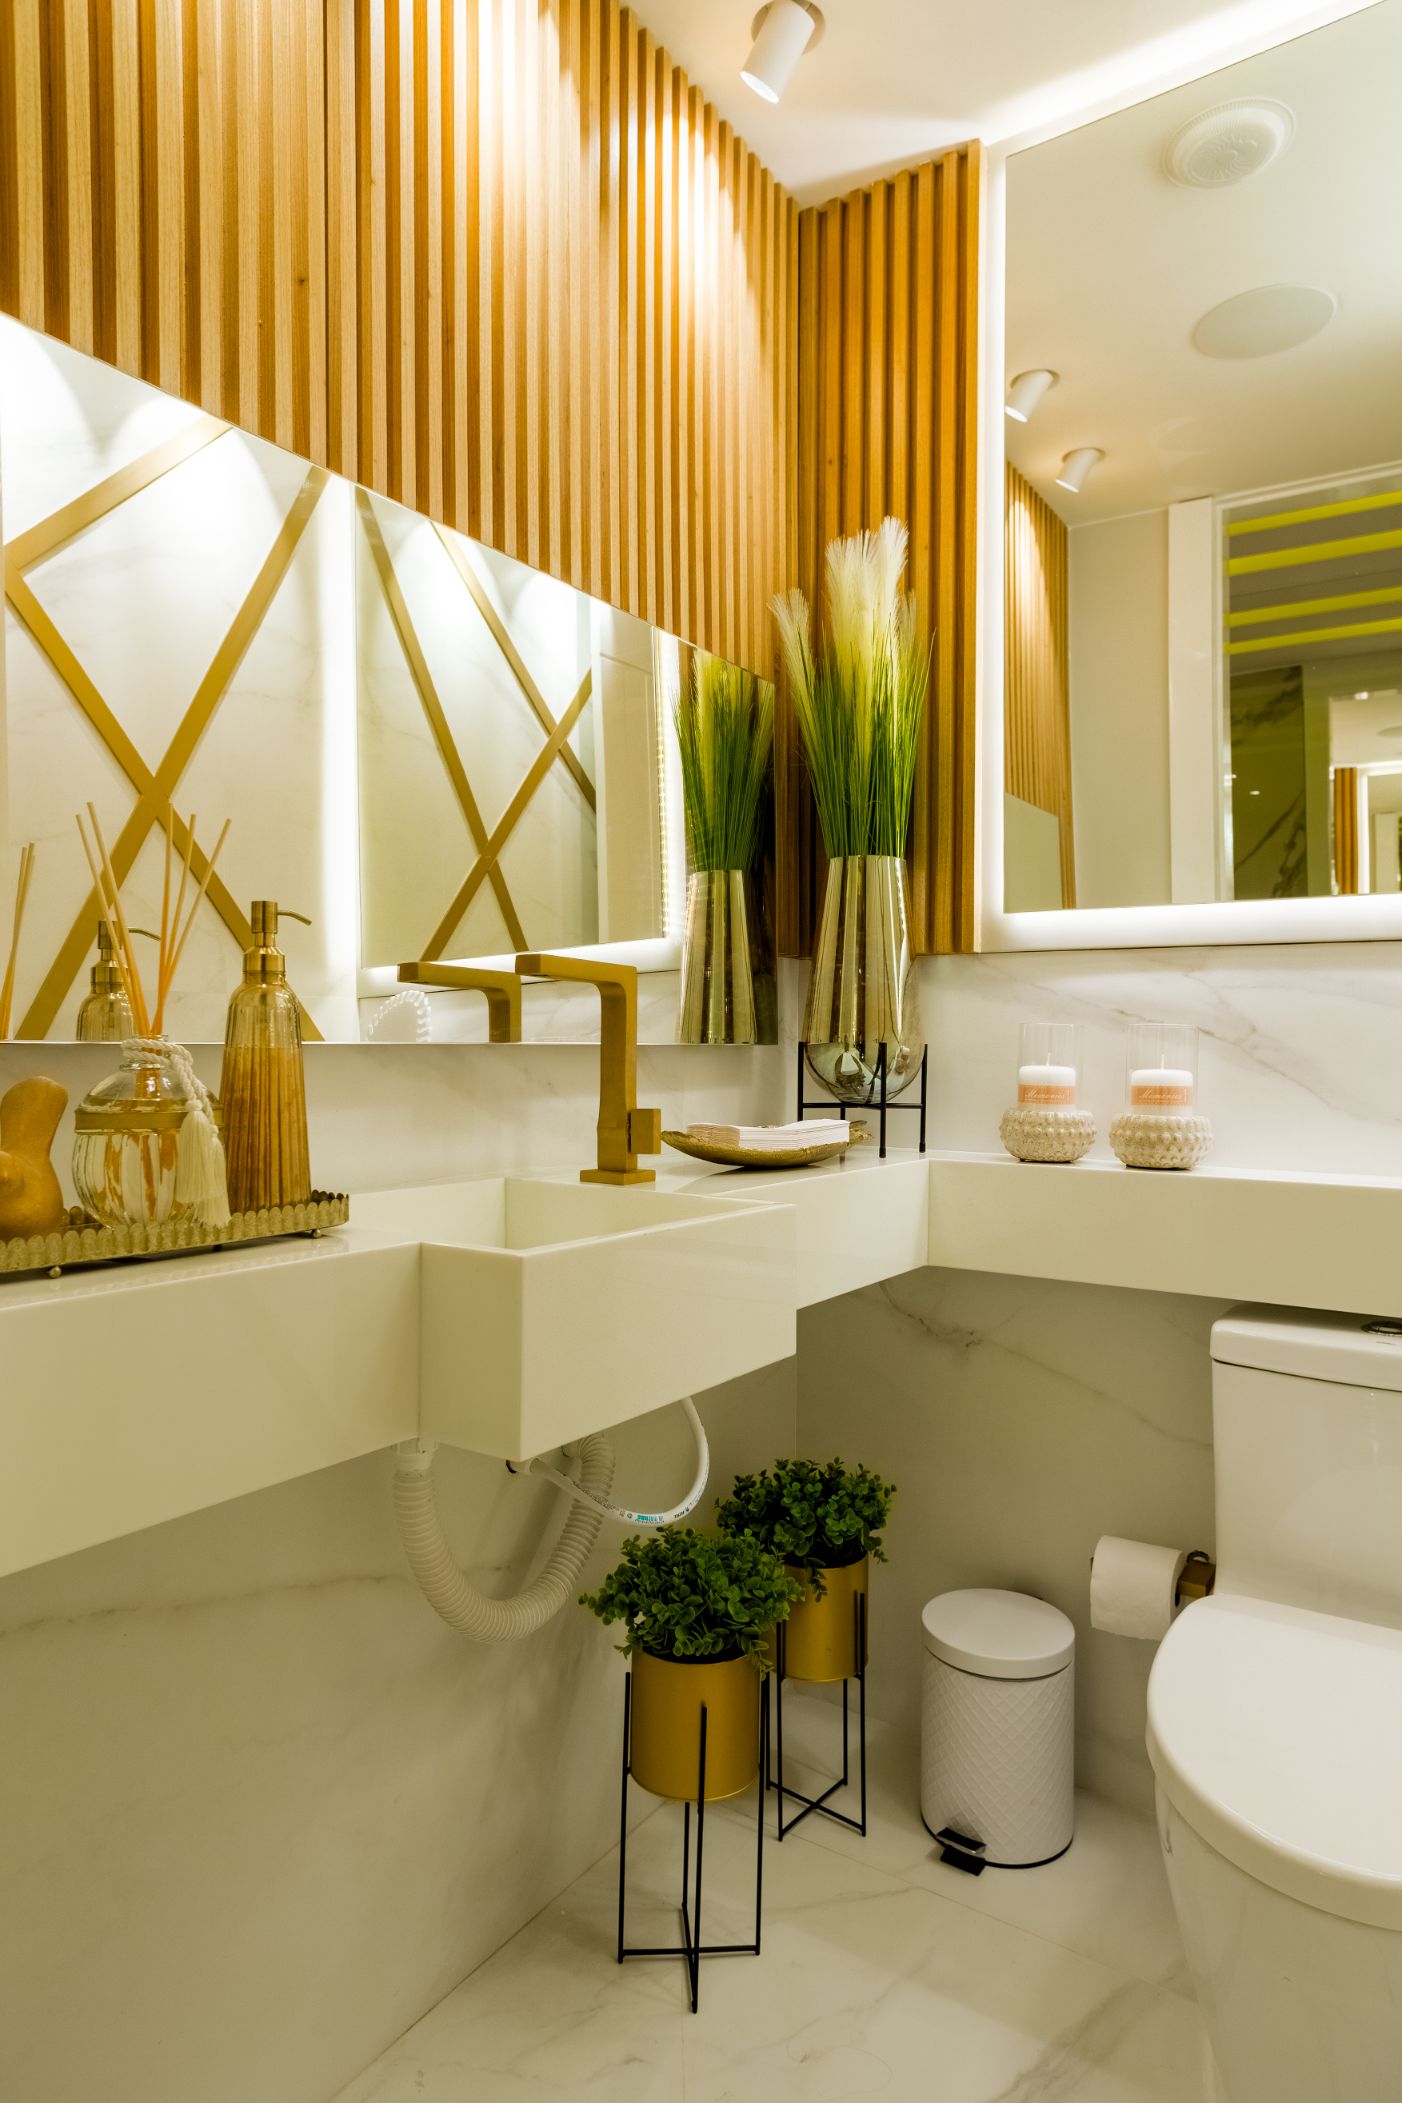 Powder Rooms add value to your property